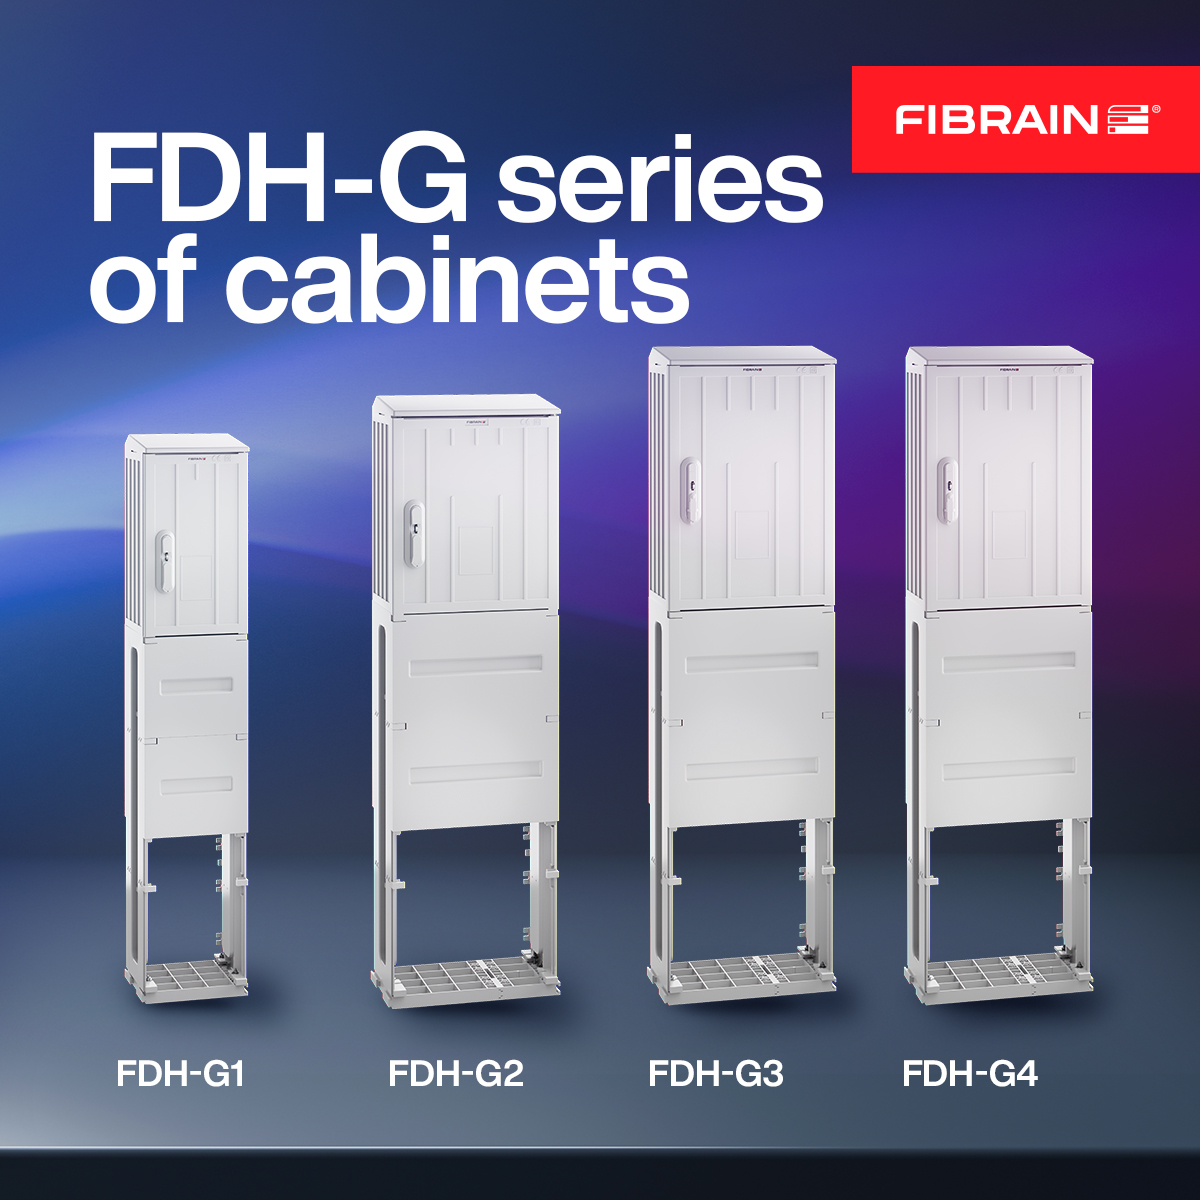 New cabinets compliment FDH-G series!